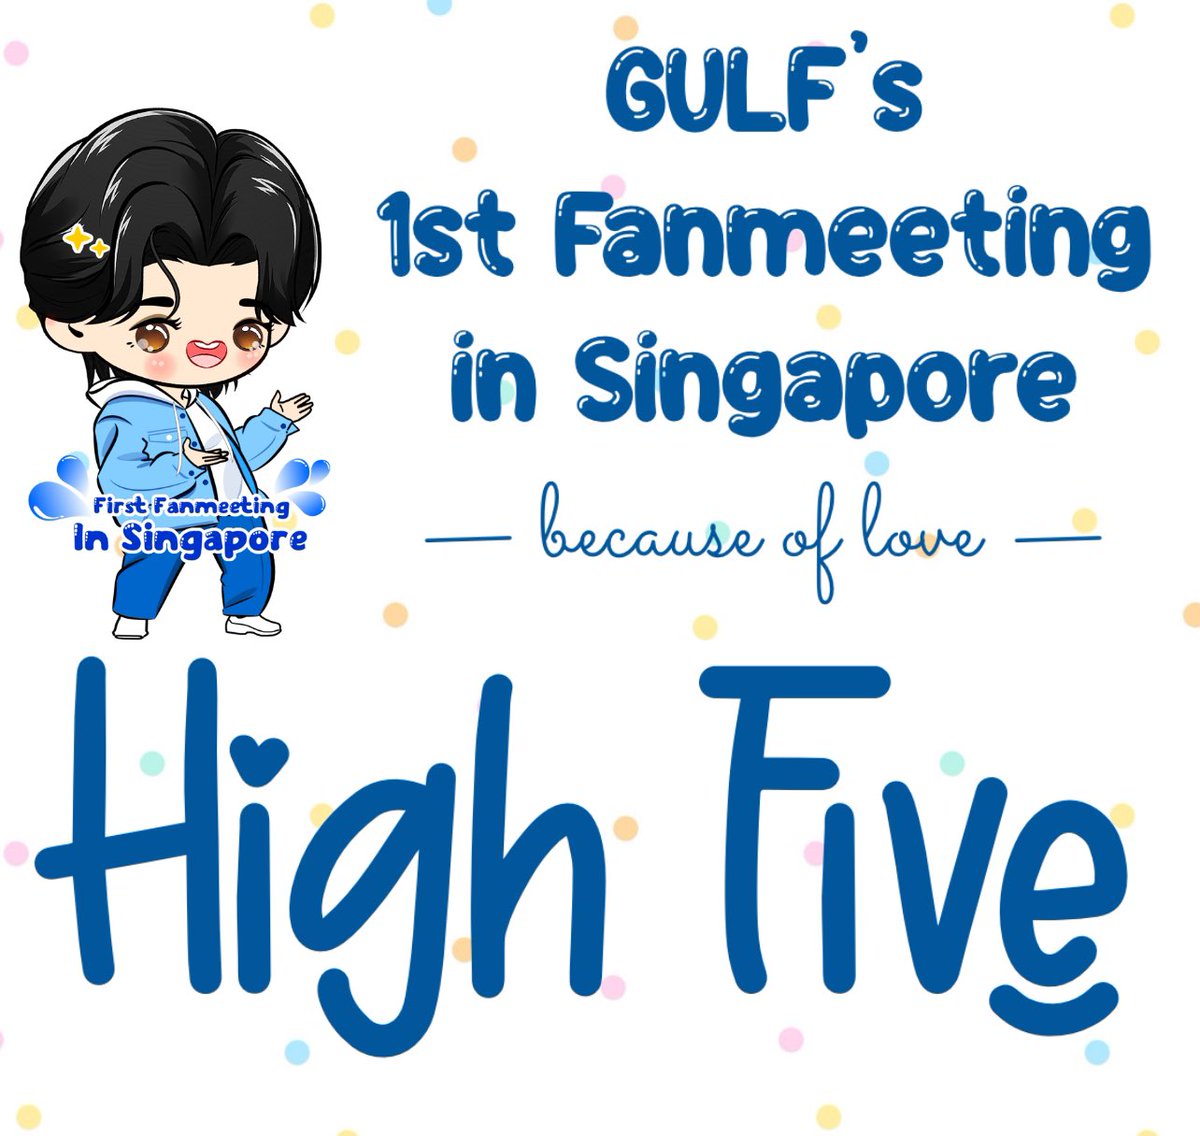 Hello fams!!!
To celebrate Gulf's first FM in this year and also his first FM in Singapore, we wanna launch a fan project for Gulf and of course for this family! 🤗

We decided that we will provide half funding for phi nong fans who want to buy the fanmeeting tickets! Whichever